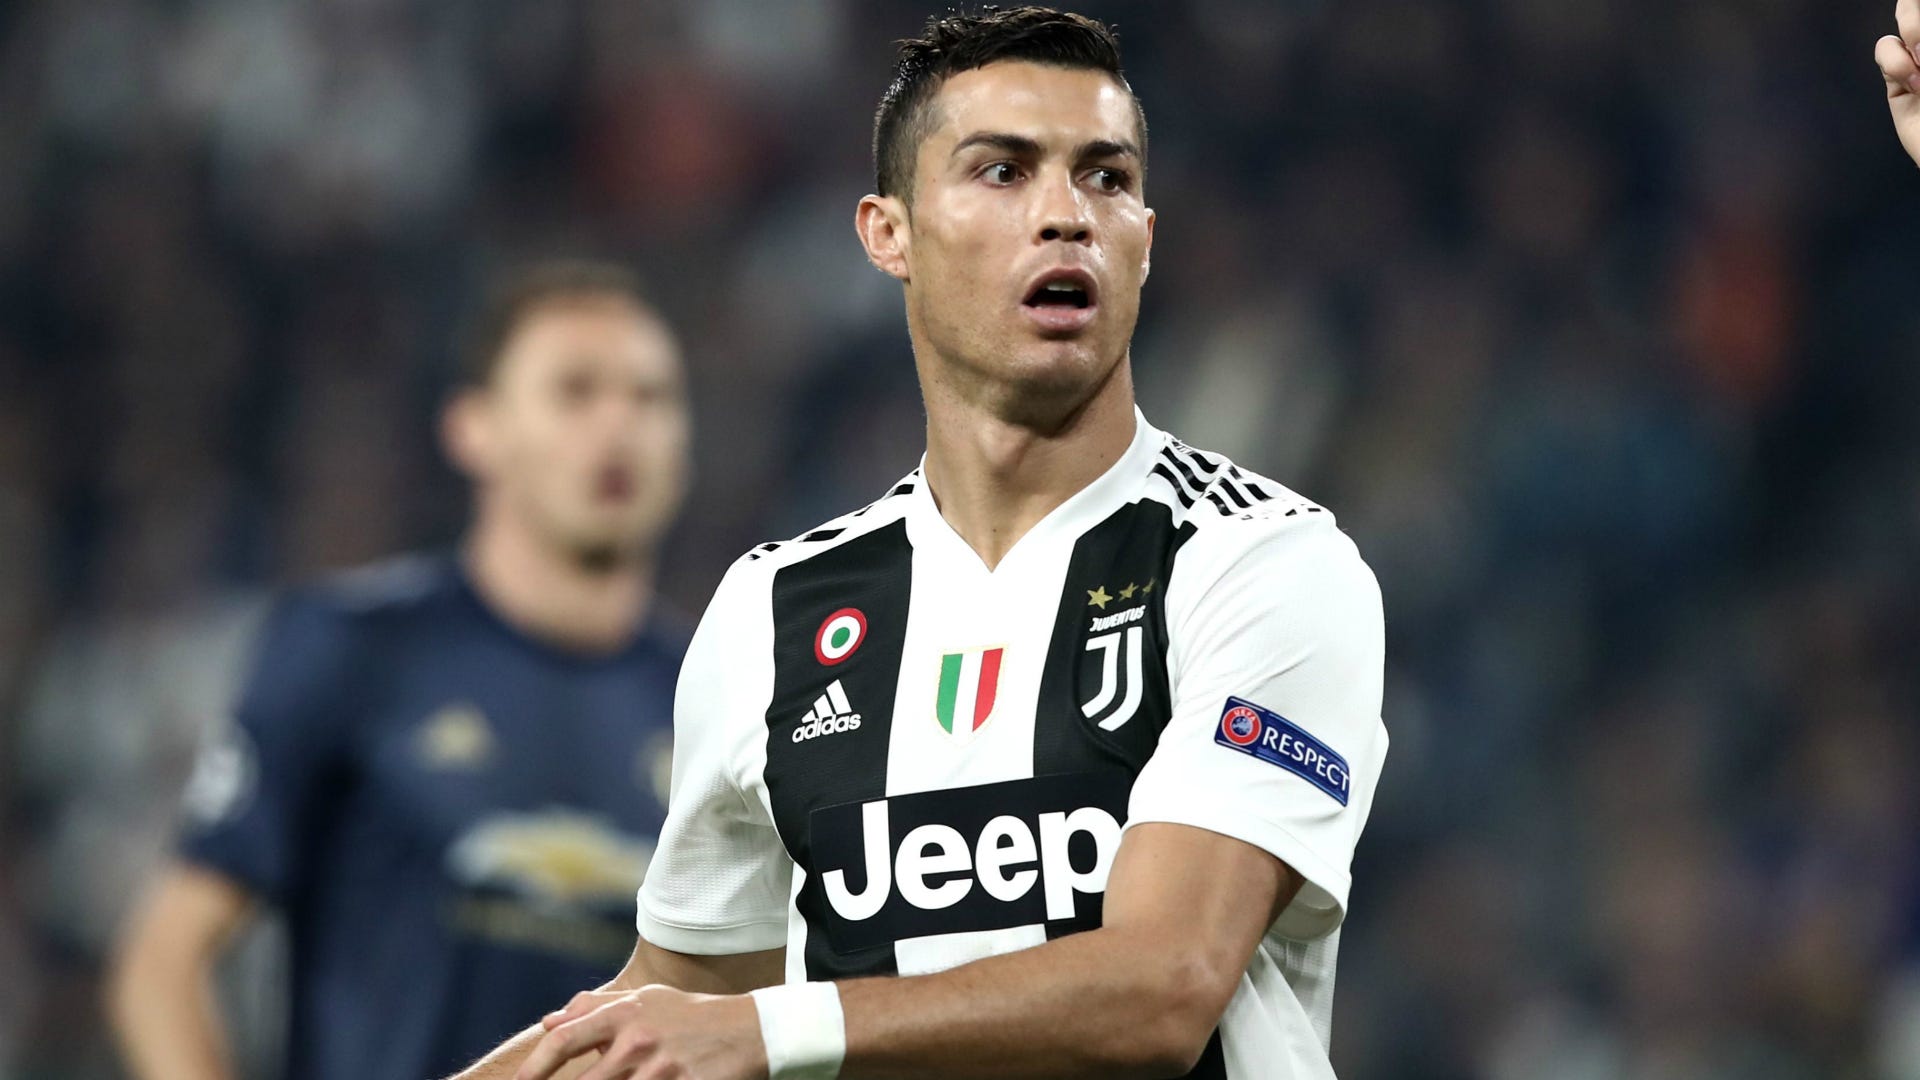 Serie A News How Do You Sell Cristiano Ronaldo For 100m Andre Villas Boas Lauds Juventus As He Considers Role In Italy Goal Com Us